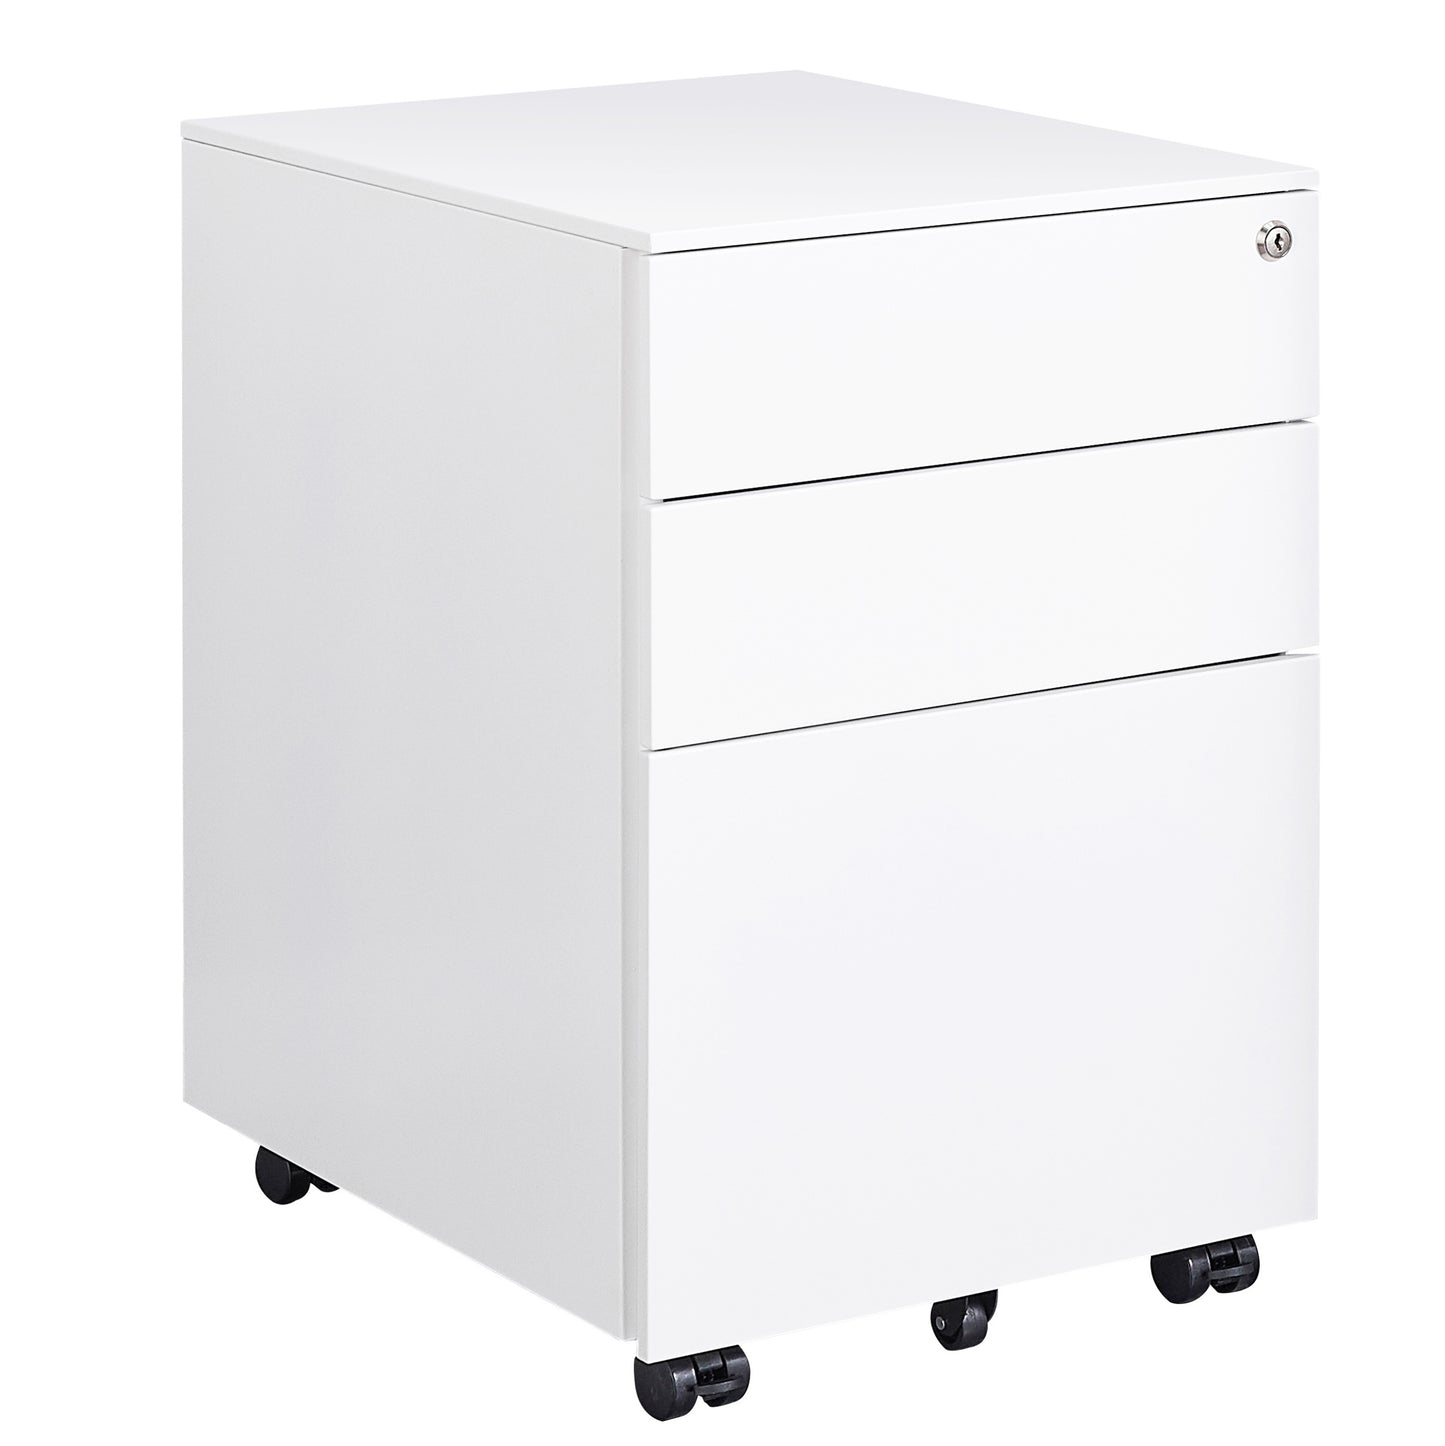 3 Drawer White Steel Mobile File Cabinet with Lock and Wheels for Home/Office